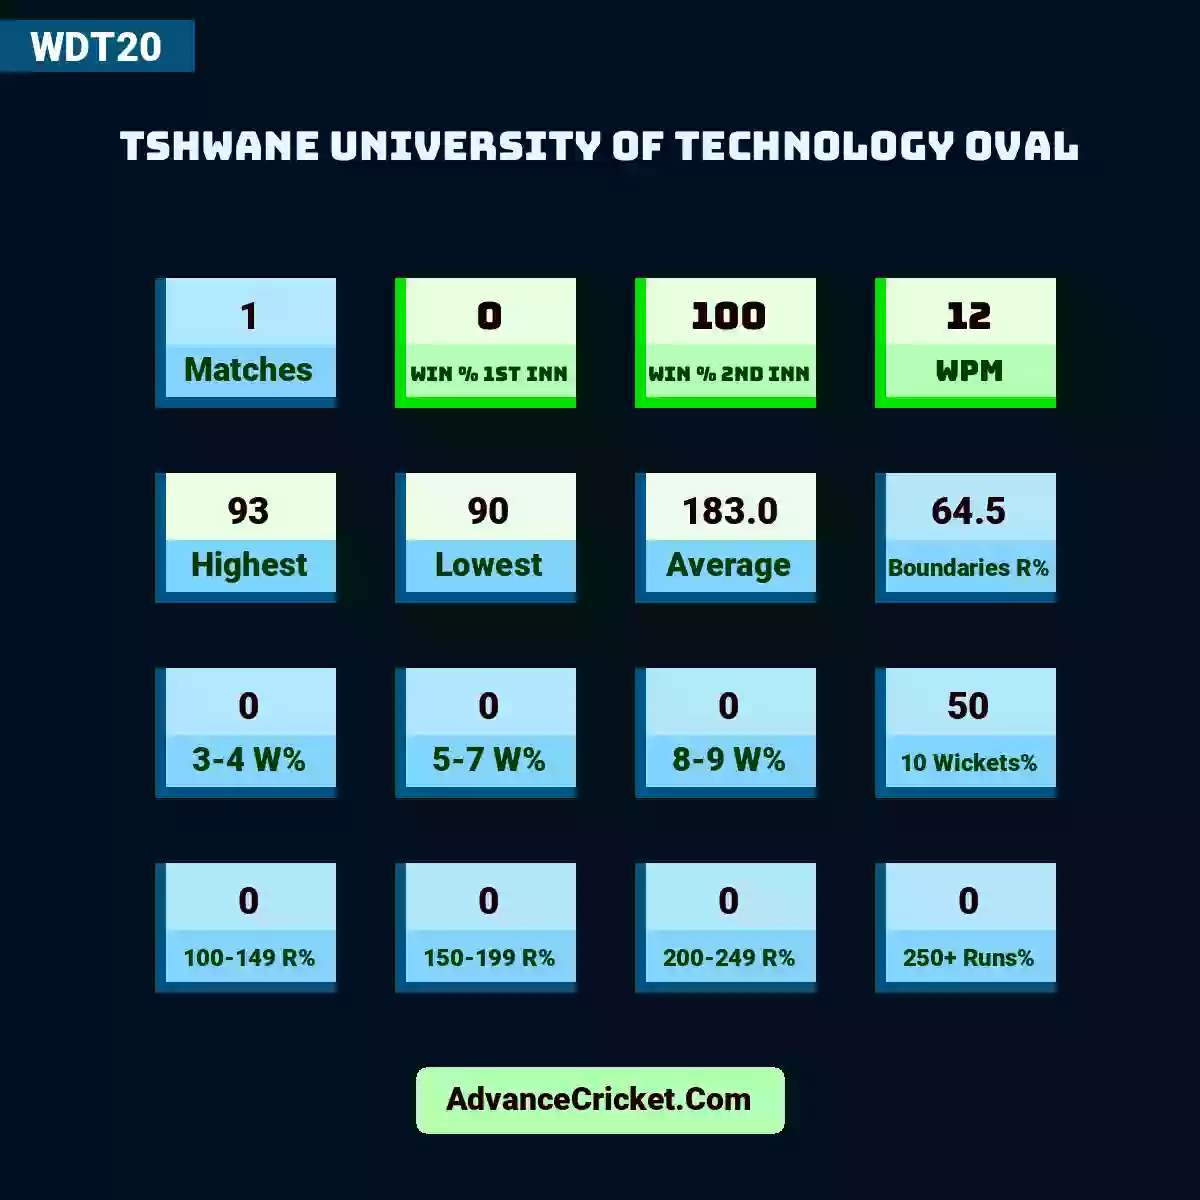 Image showing Tshwane University Of Technology Oval with Matches: 1, Win % 1st Inn: 0, Win % 2nd Inn: 100, WPM: 12, Highest: 93, Lowest: 90, Average: 183.0, Boundaries R%: 64.5, 3-4 W%: 0, 5-7 W%: 0, 8-9 W%: 0, 10 Wickets%: 50, 100-149 R%: 0, 150-199 R%: 0, 200-249 R%: 0, 250+ Runs%: 0.